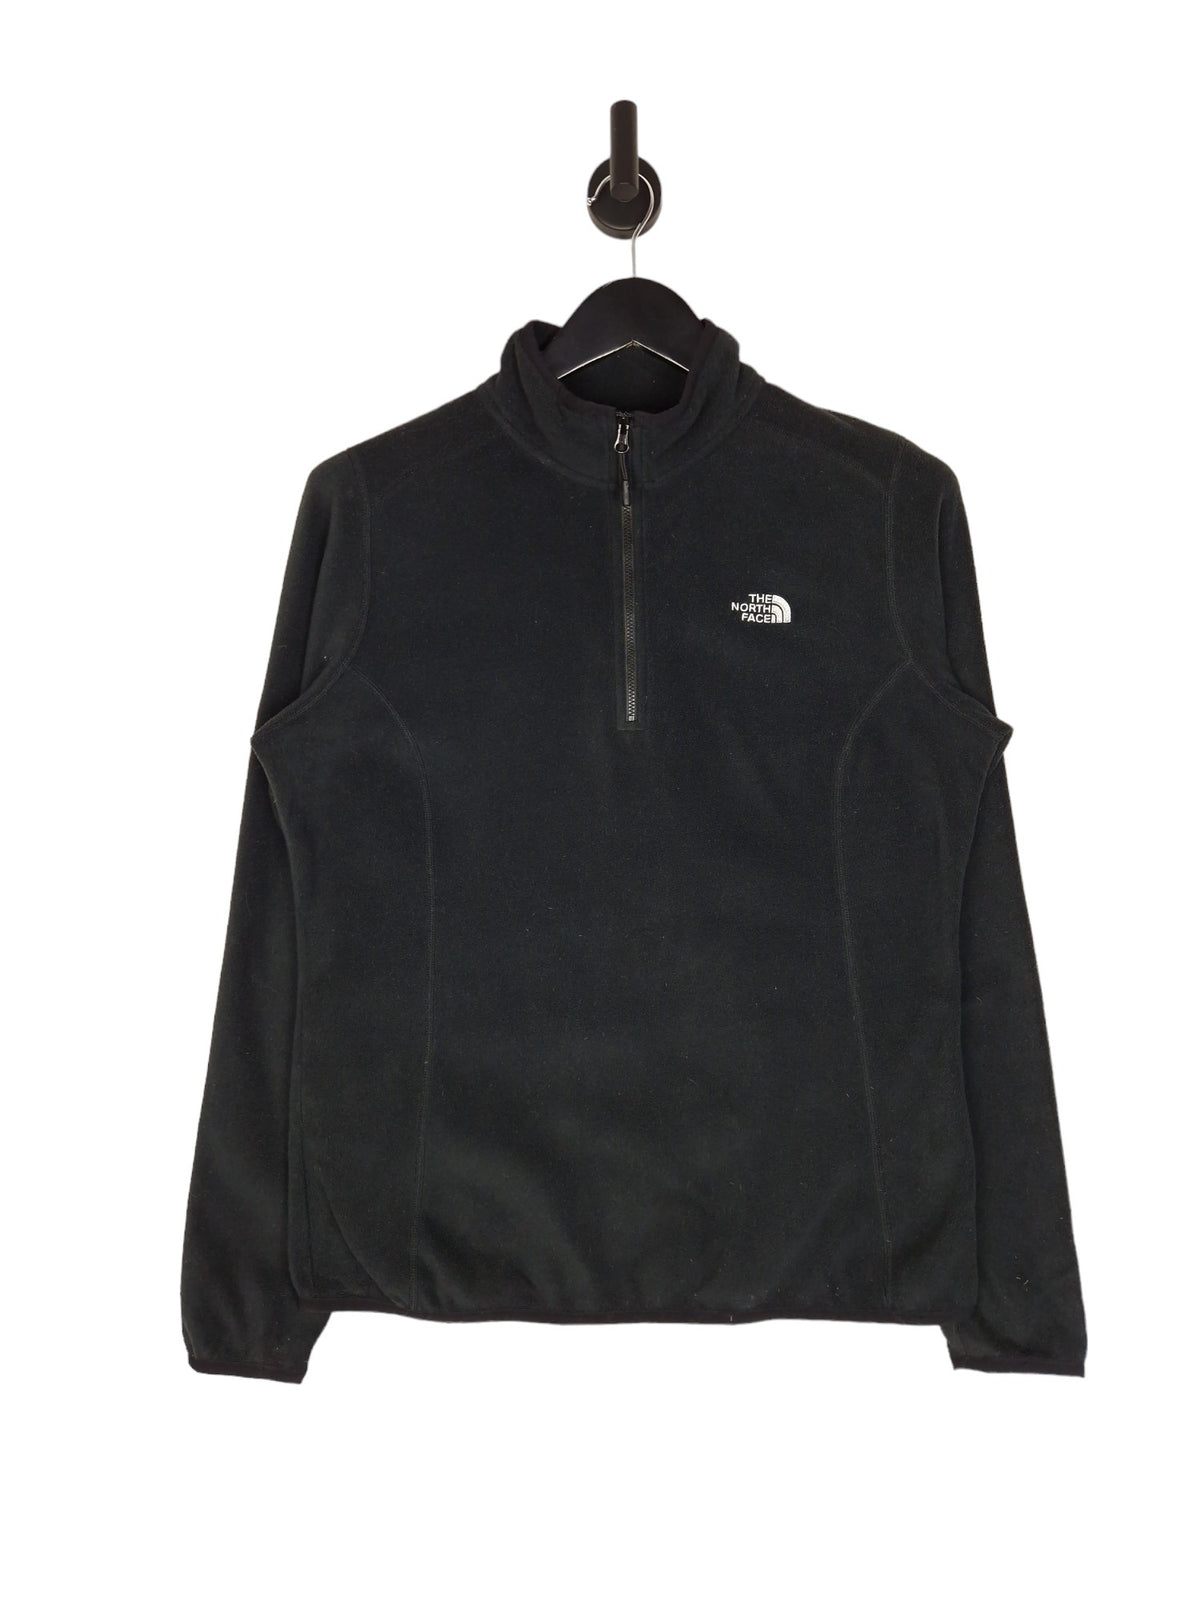 The North Face 1/4 Zip Fleece Jumper - Size Large